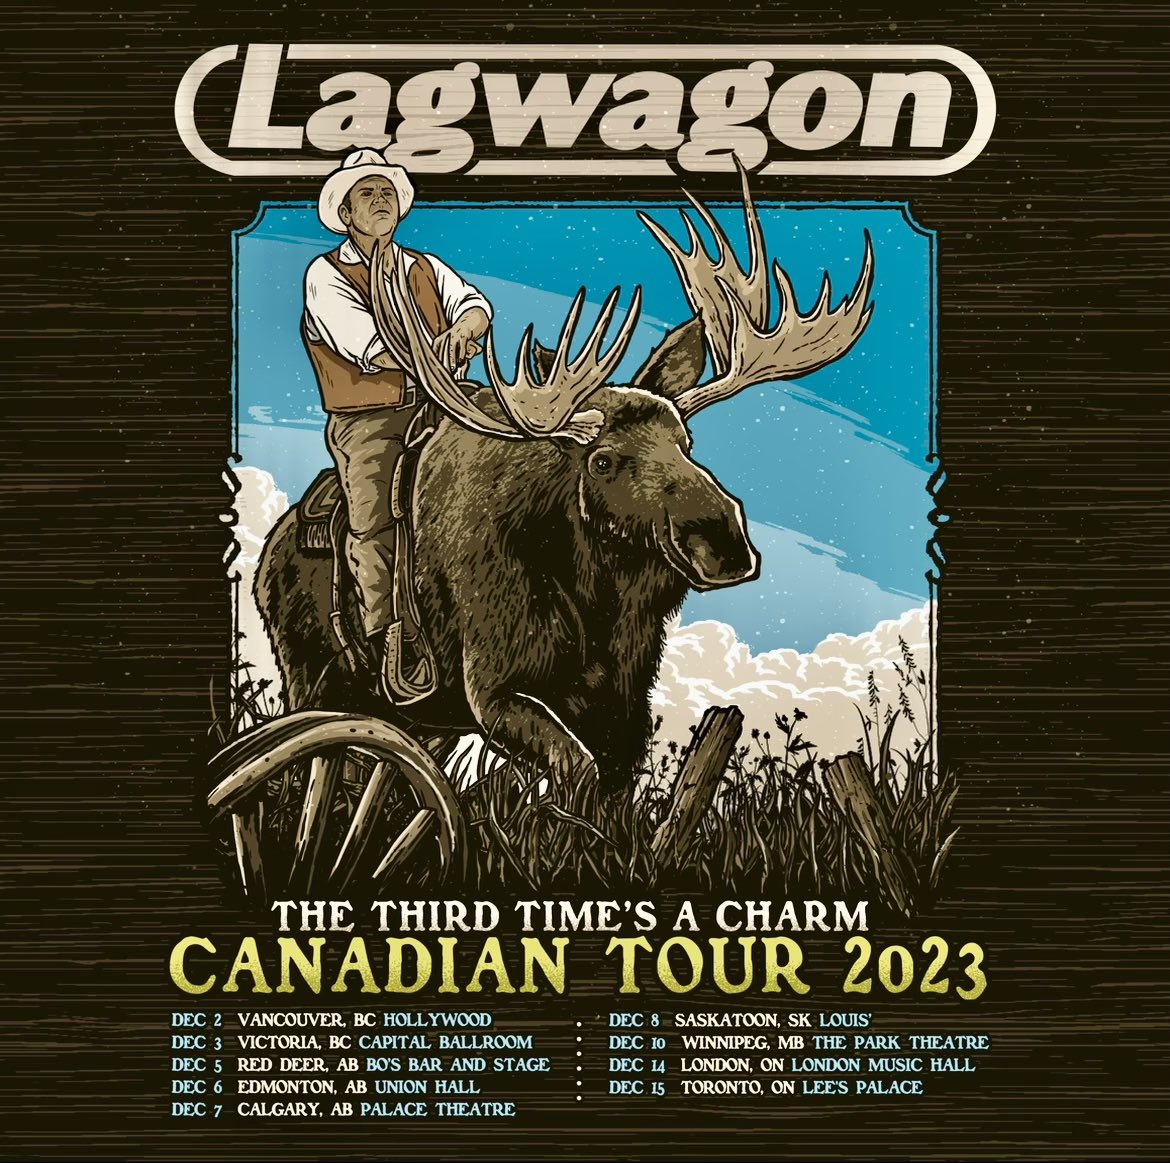 🇨🇦CANADA!🇨🇦 We are super stoked to announce our rescheduled Canadian tour, including new gigs in Vancouver, Victoria and London! Tickets are on sale now, LET'S GOOOOOO! 👉🏽 Lagwagon.com/tour 👈🏽 Flyer: @SterioDesign #lagwagon #canada #punk #punkrock @fat_wreck @f7entgroup